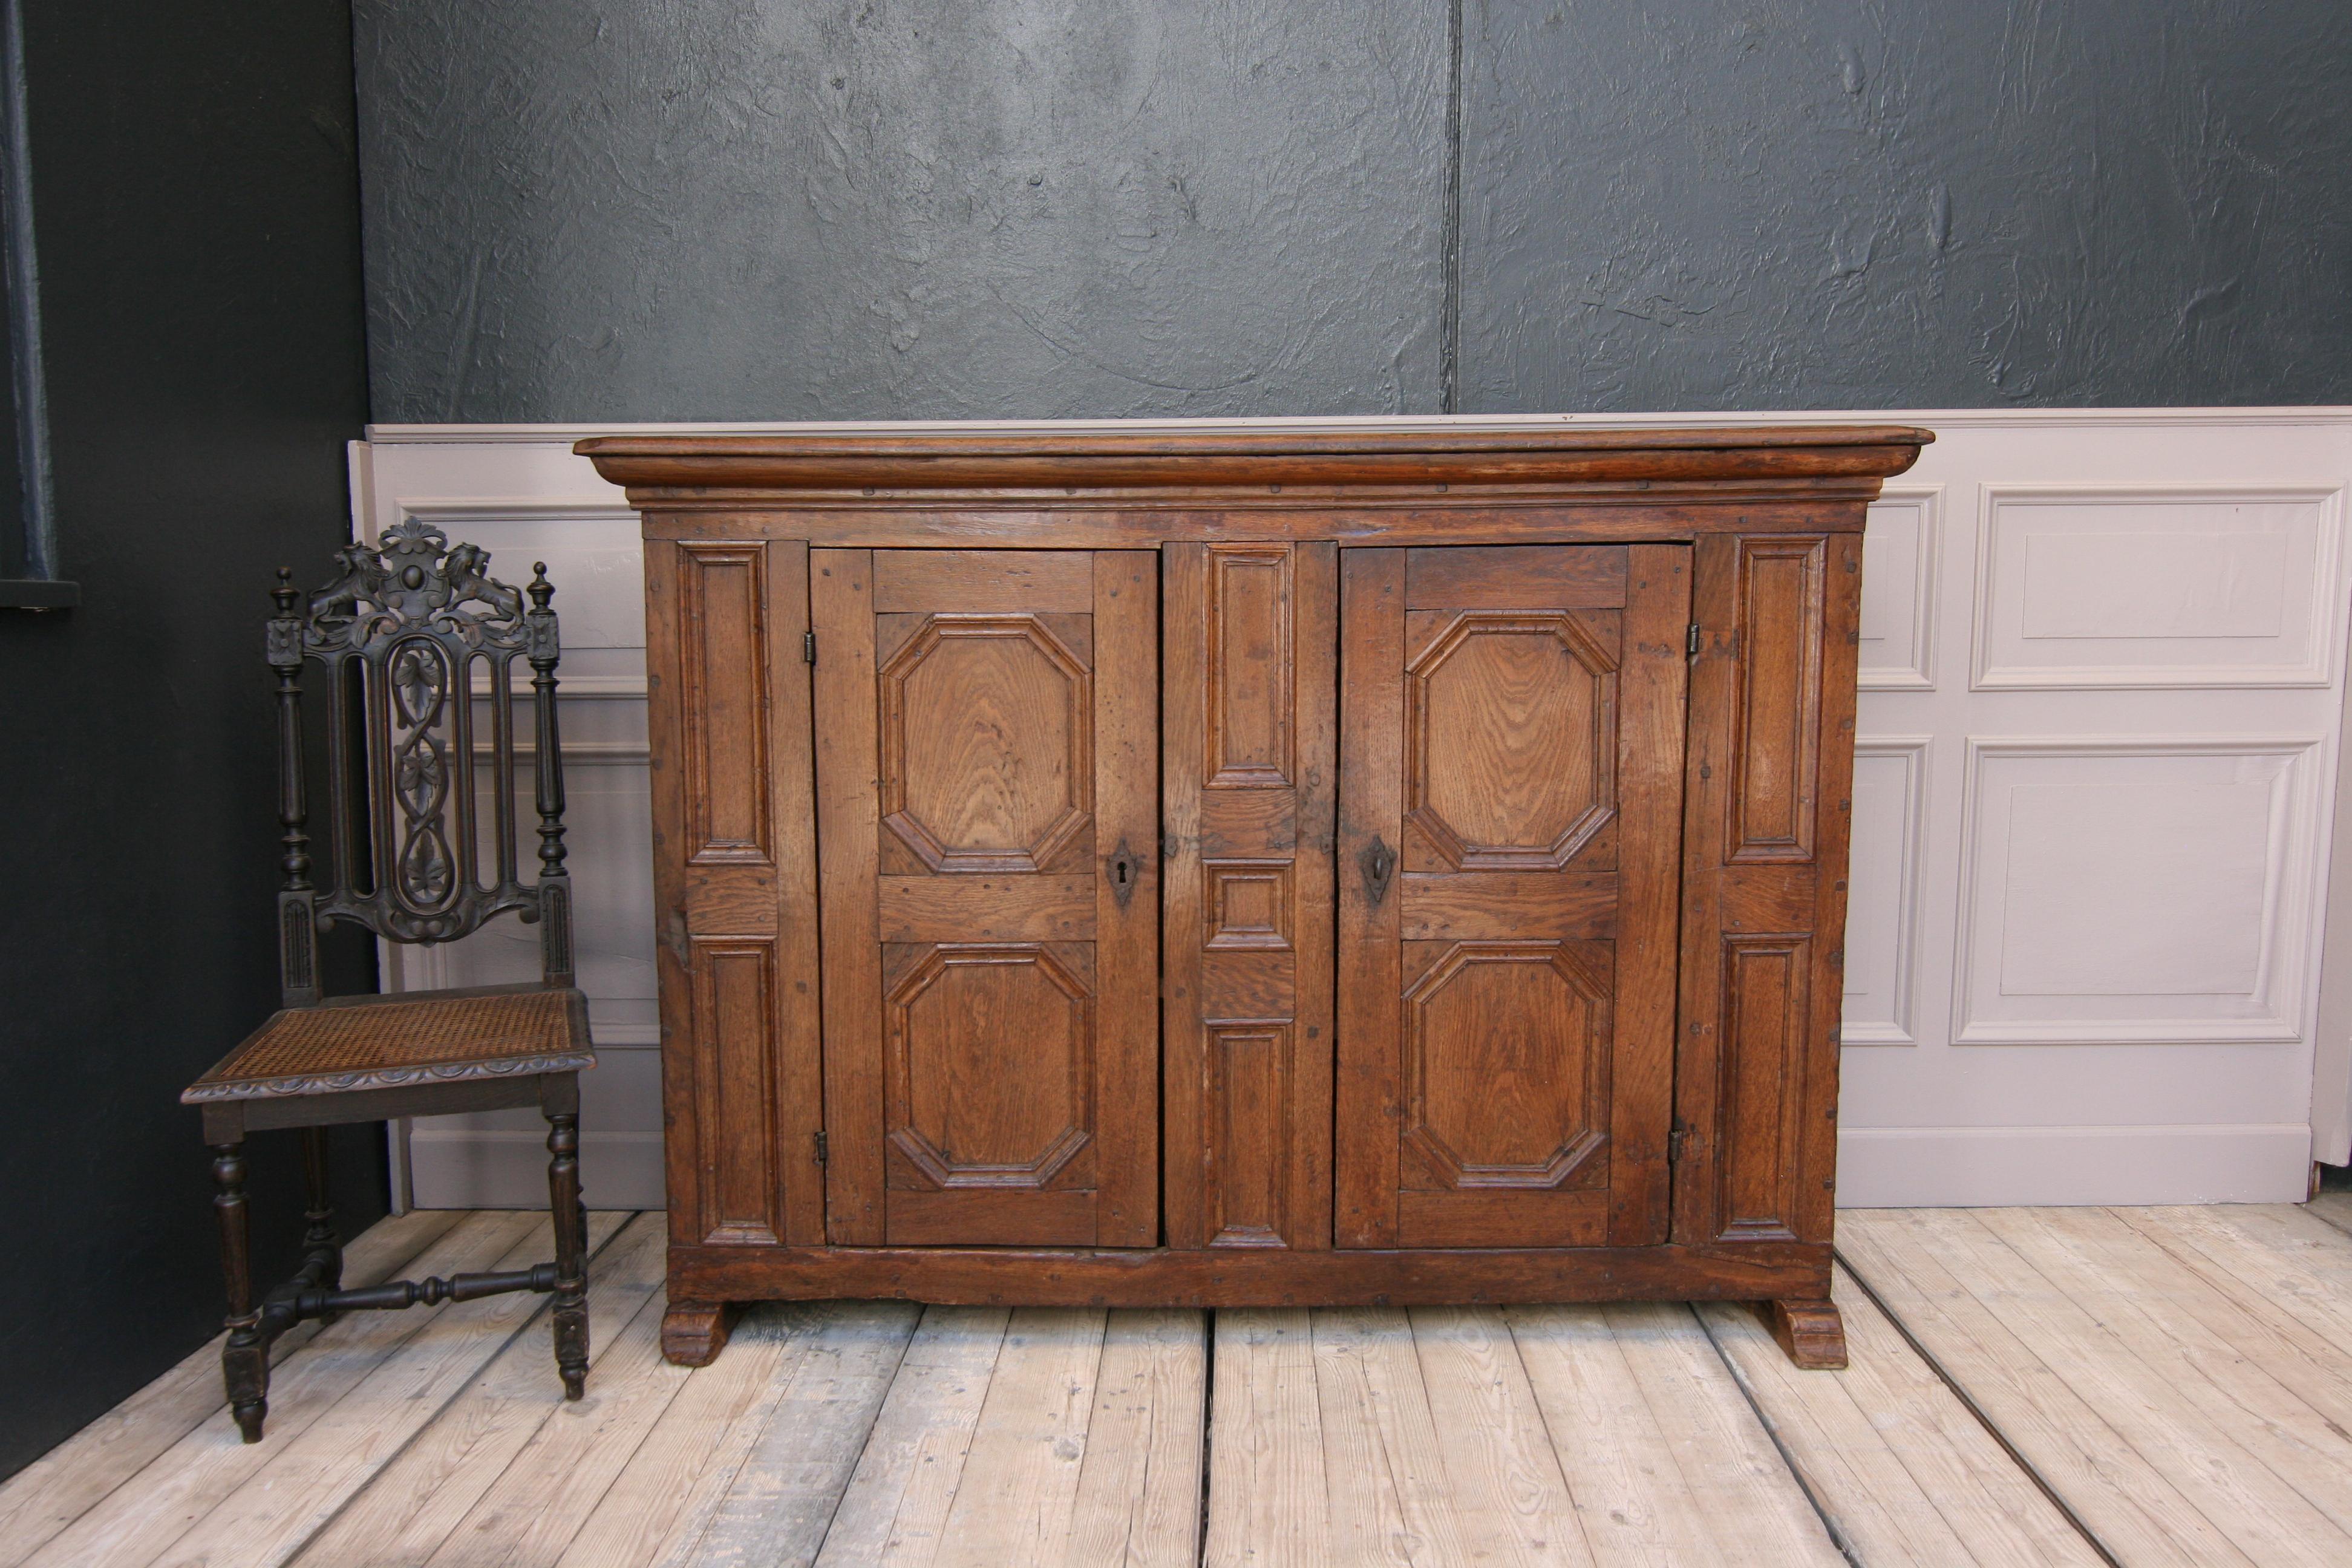 Rustic German sideboard or credenza, made of solid oak. Probably from the Westphalia region circa 1780.

Dimensions: 
123 cm high / 48.42 inch high,
171 cm wide / 67.32 inch wide,
51 cm deep / 20.08 inch deep.